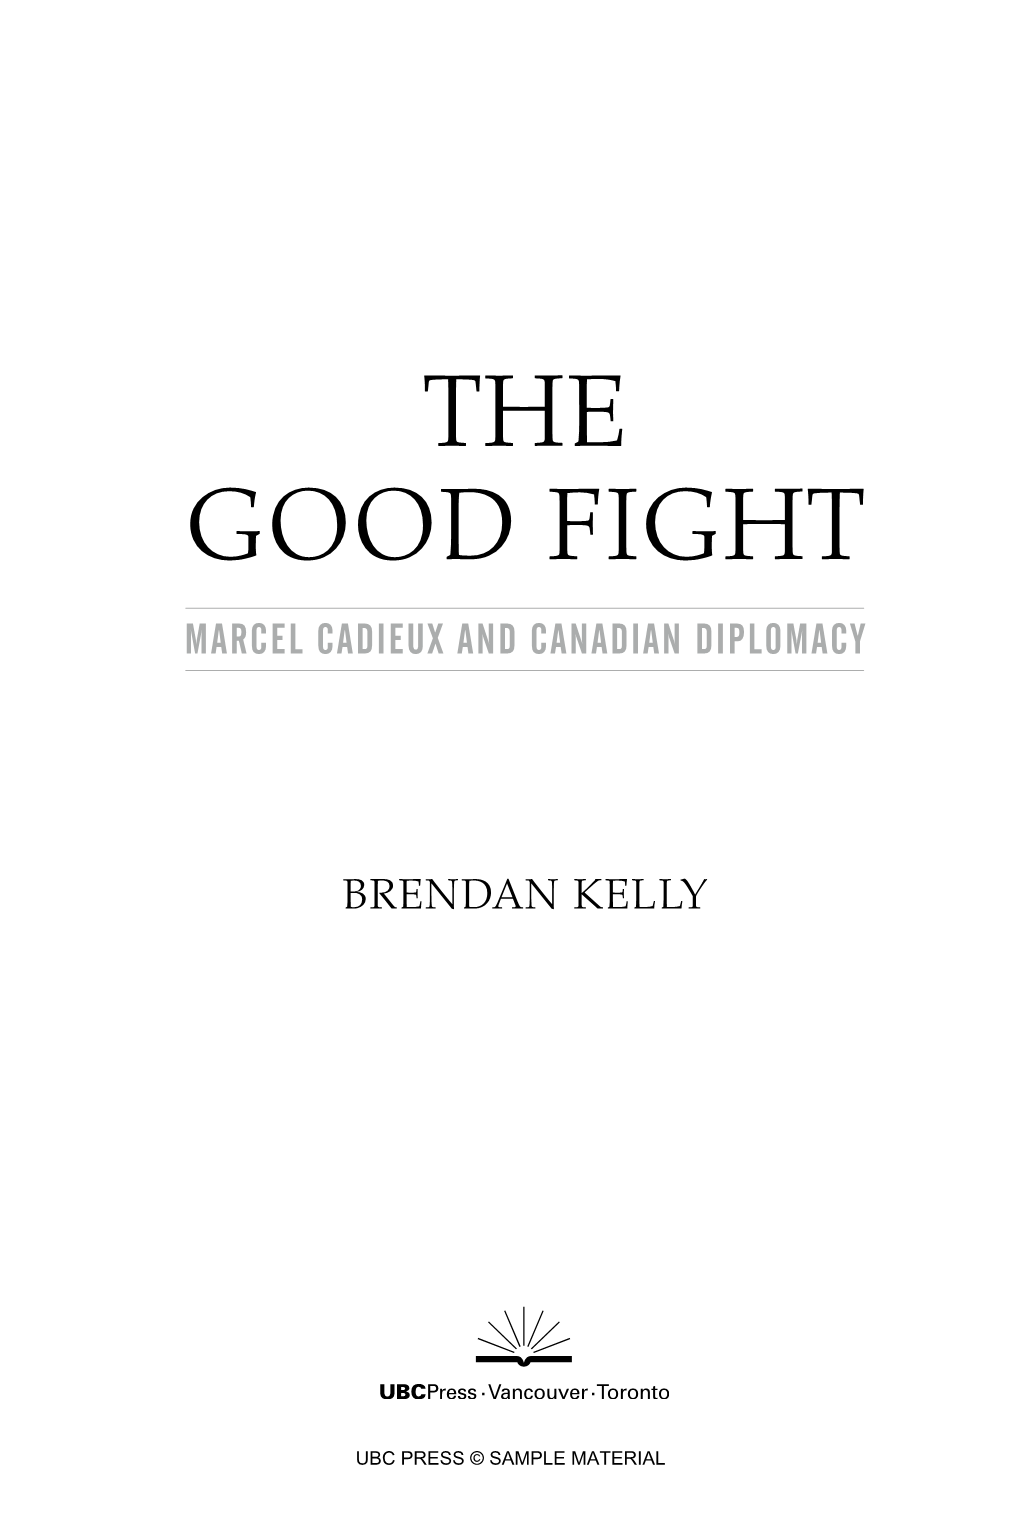 The Good Fight Marcel Cadieux and Canadian Diplomacy